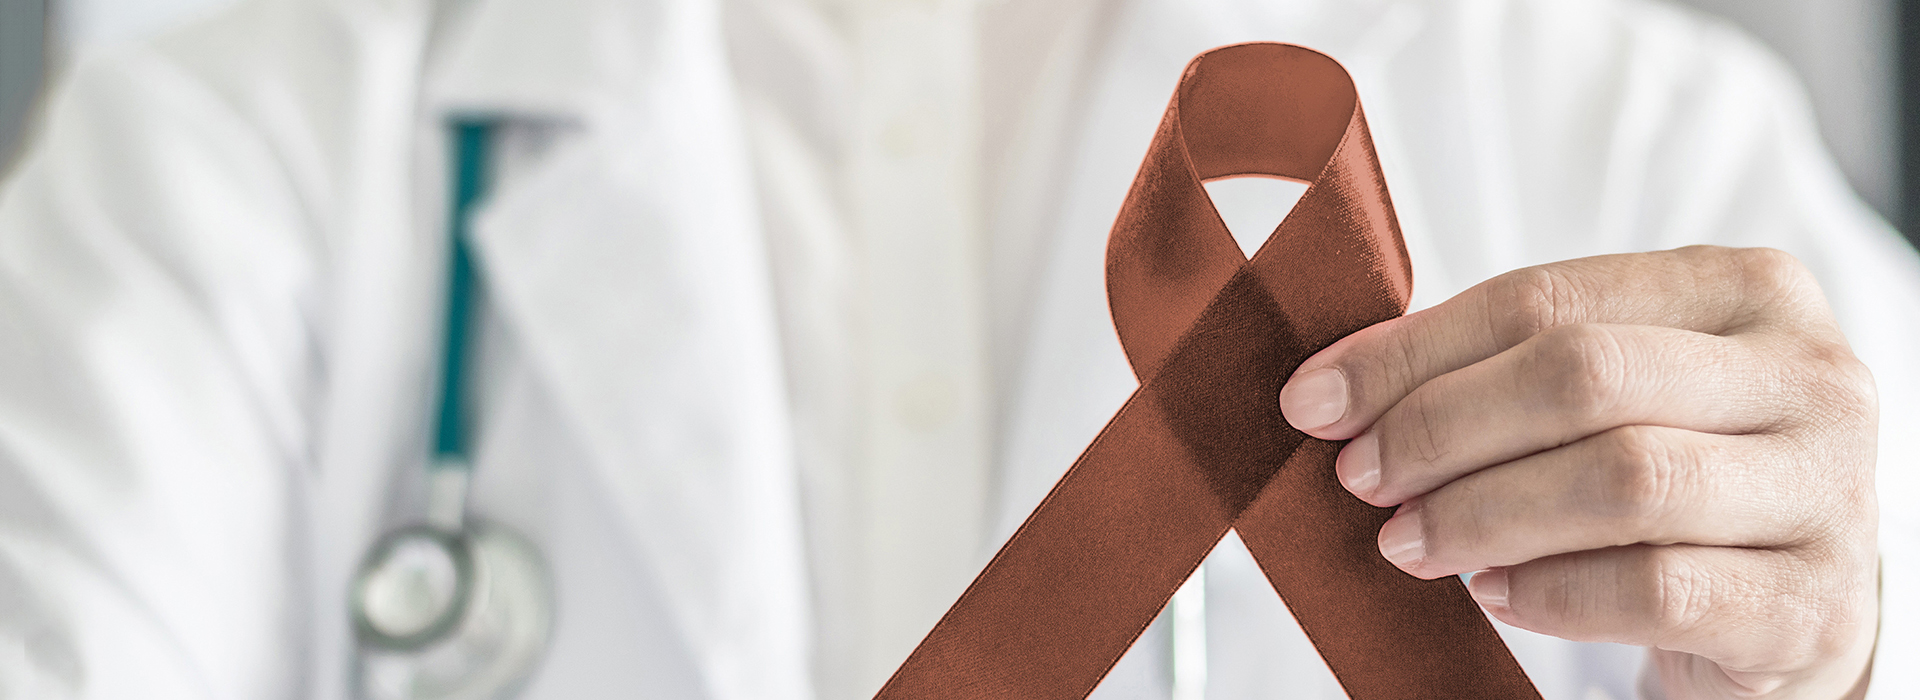 The image shows a medical professional holding up a red ribbon with a white cross, symbolizing the awareness of a specific health condition.